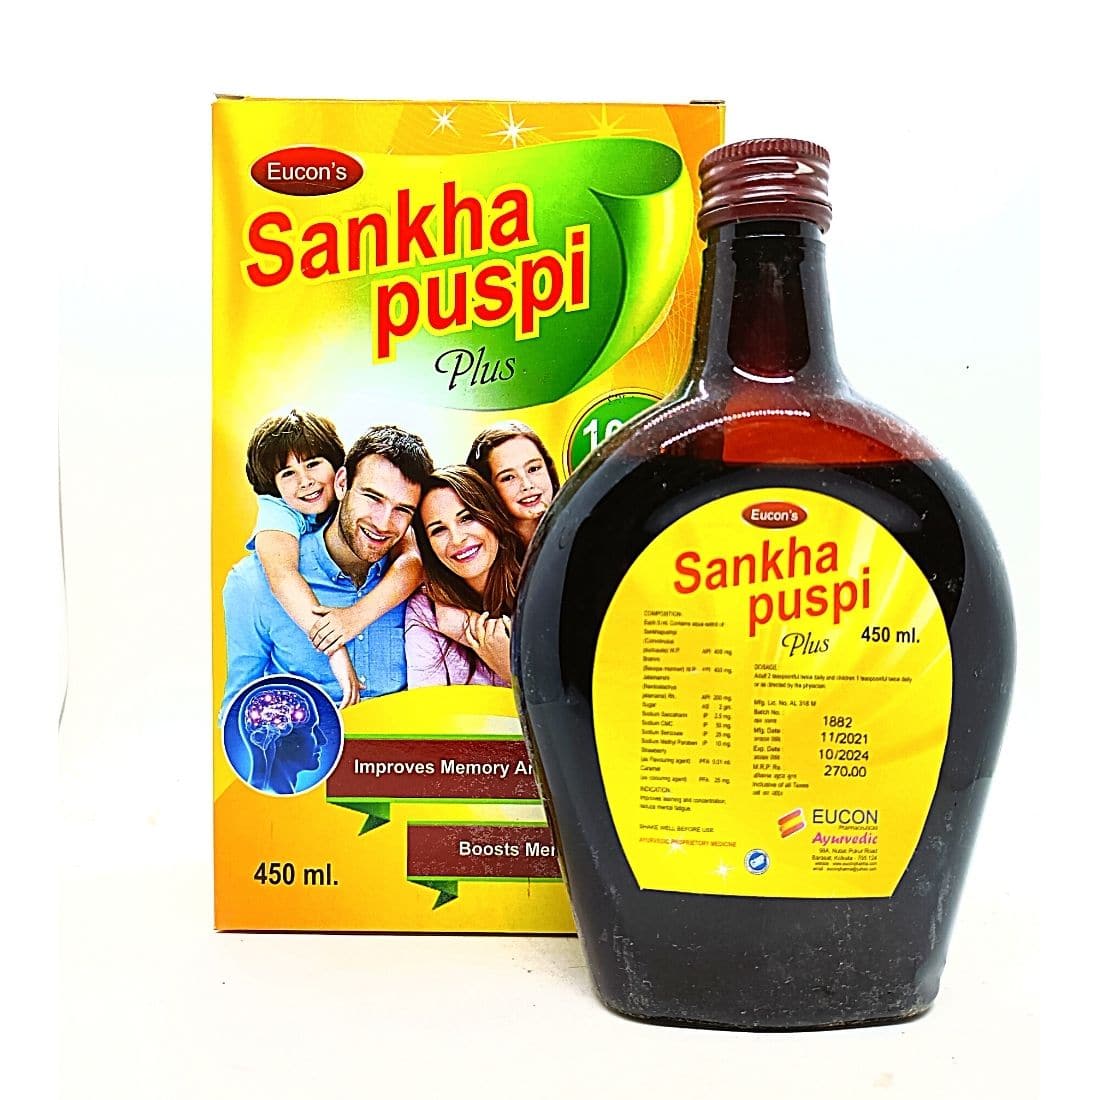 Shankha puspi Plus Syrup is a traditional remedy for increasing the functioning of the brain,The powerful antioxidants.